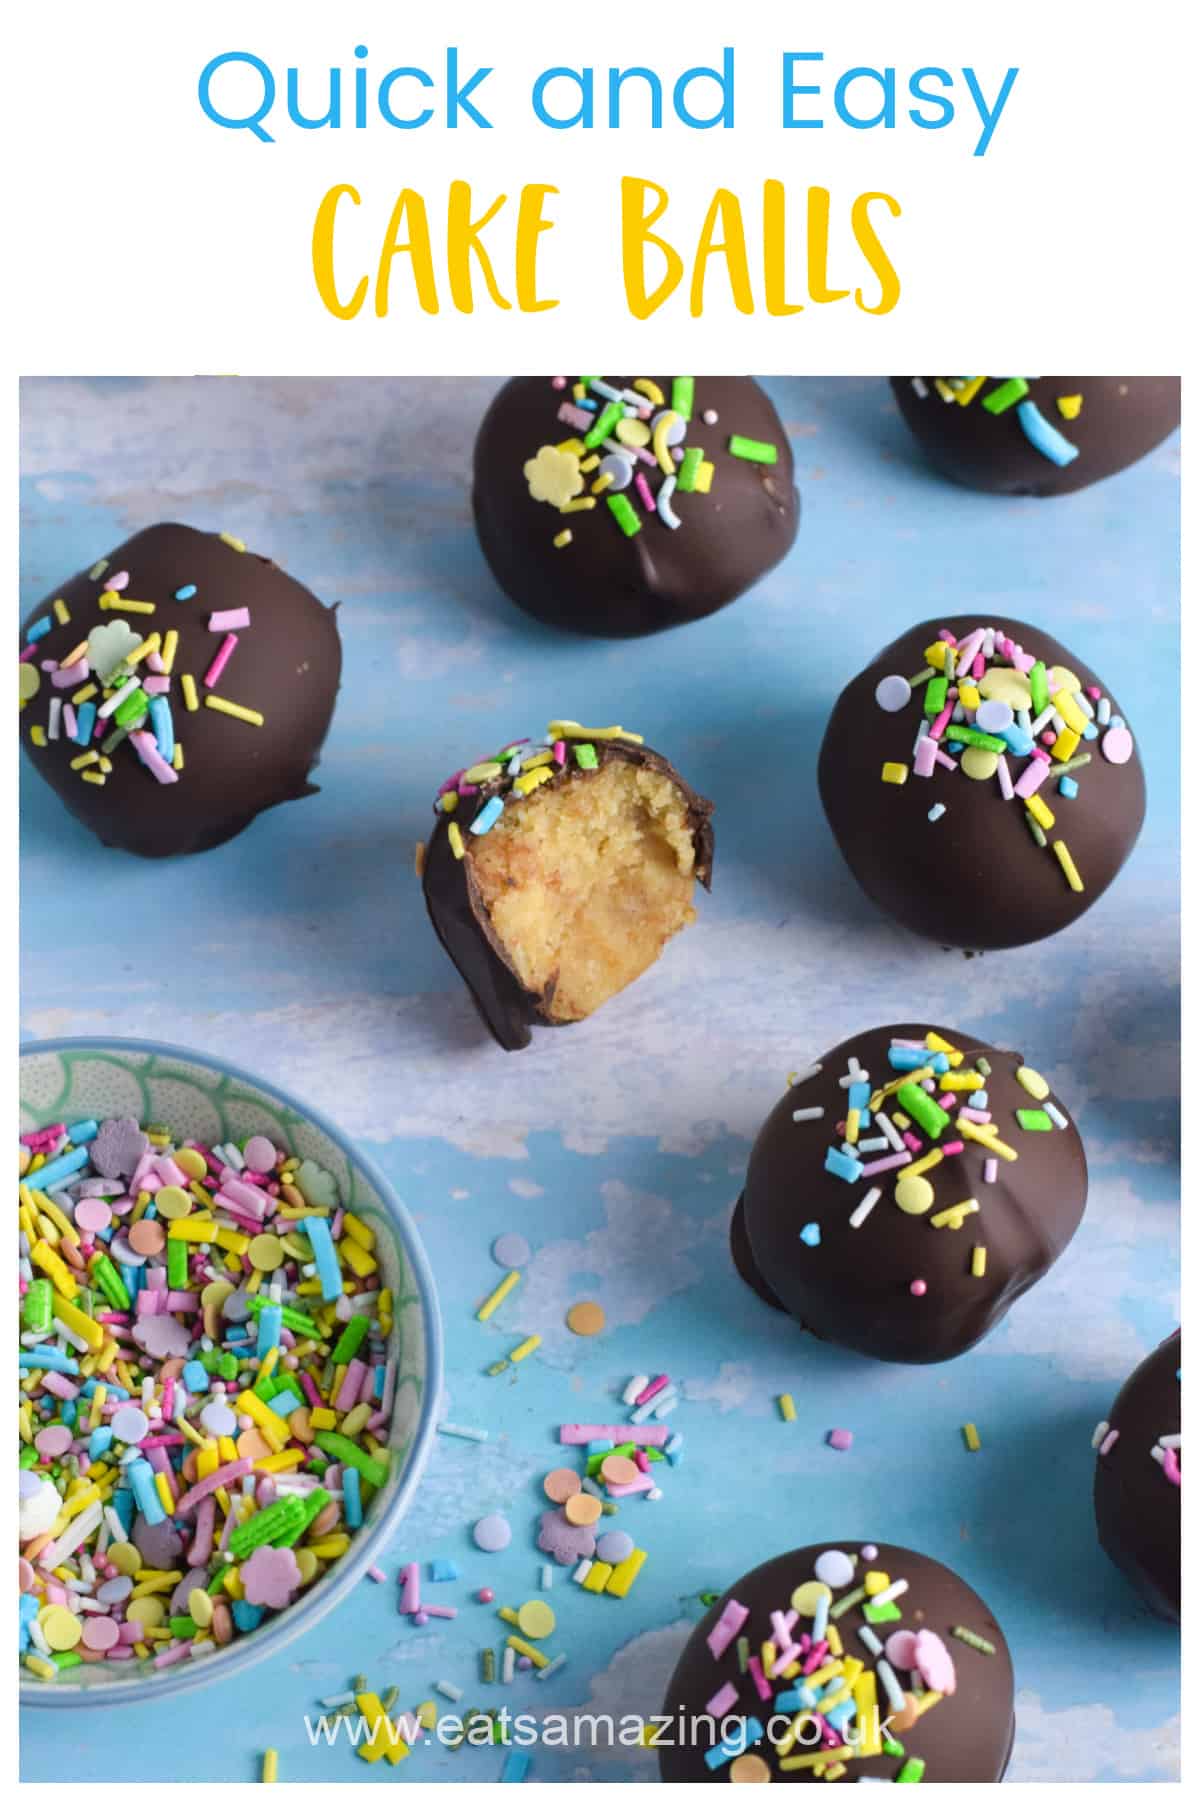 How to make quick and easy cake balls from leftover cake scraps